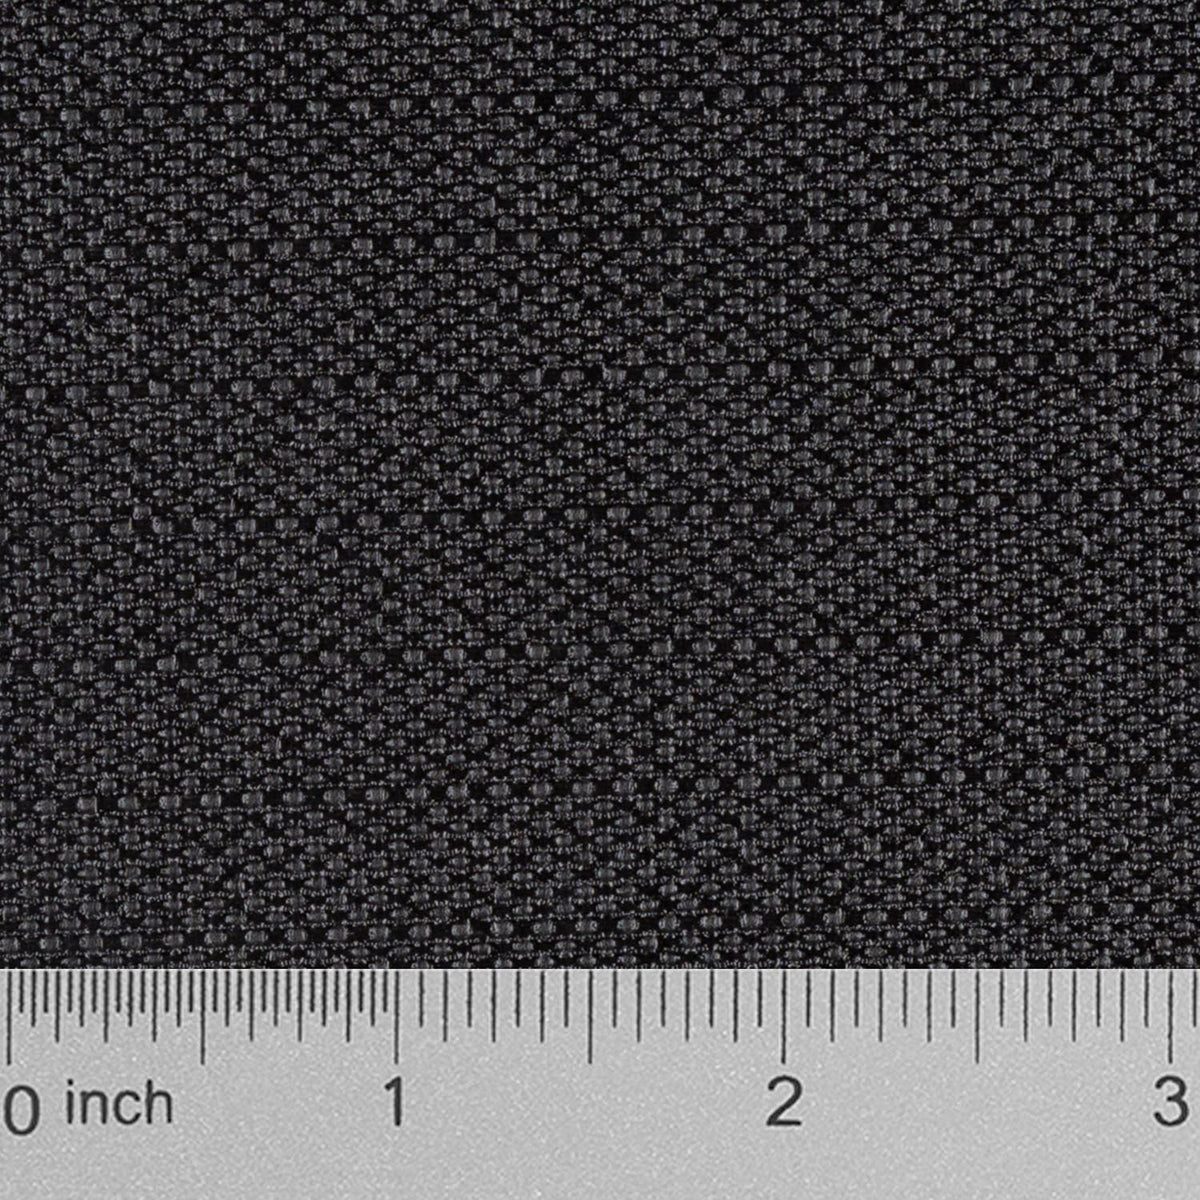 FR Sew on Hook and Loop for Fabric 1 inch Wide, 5 Yards, Black Color